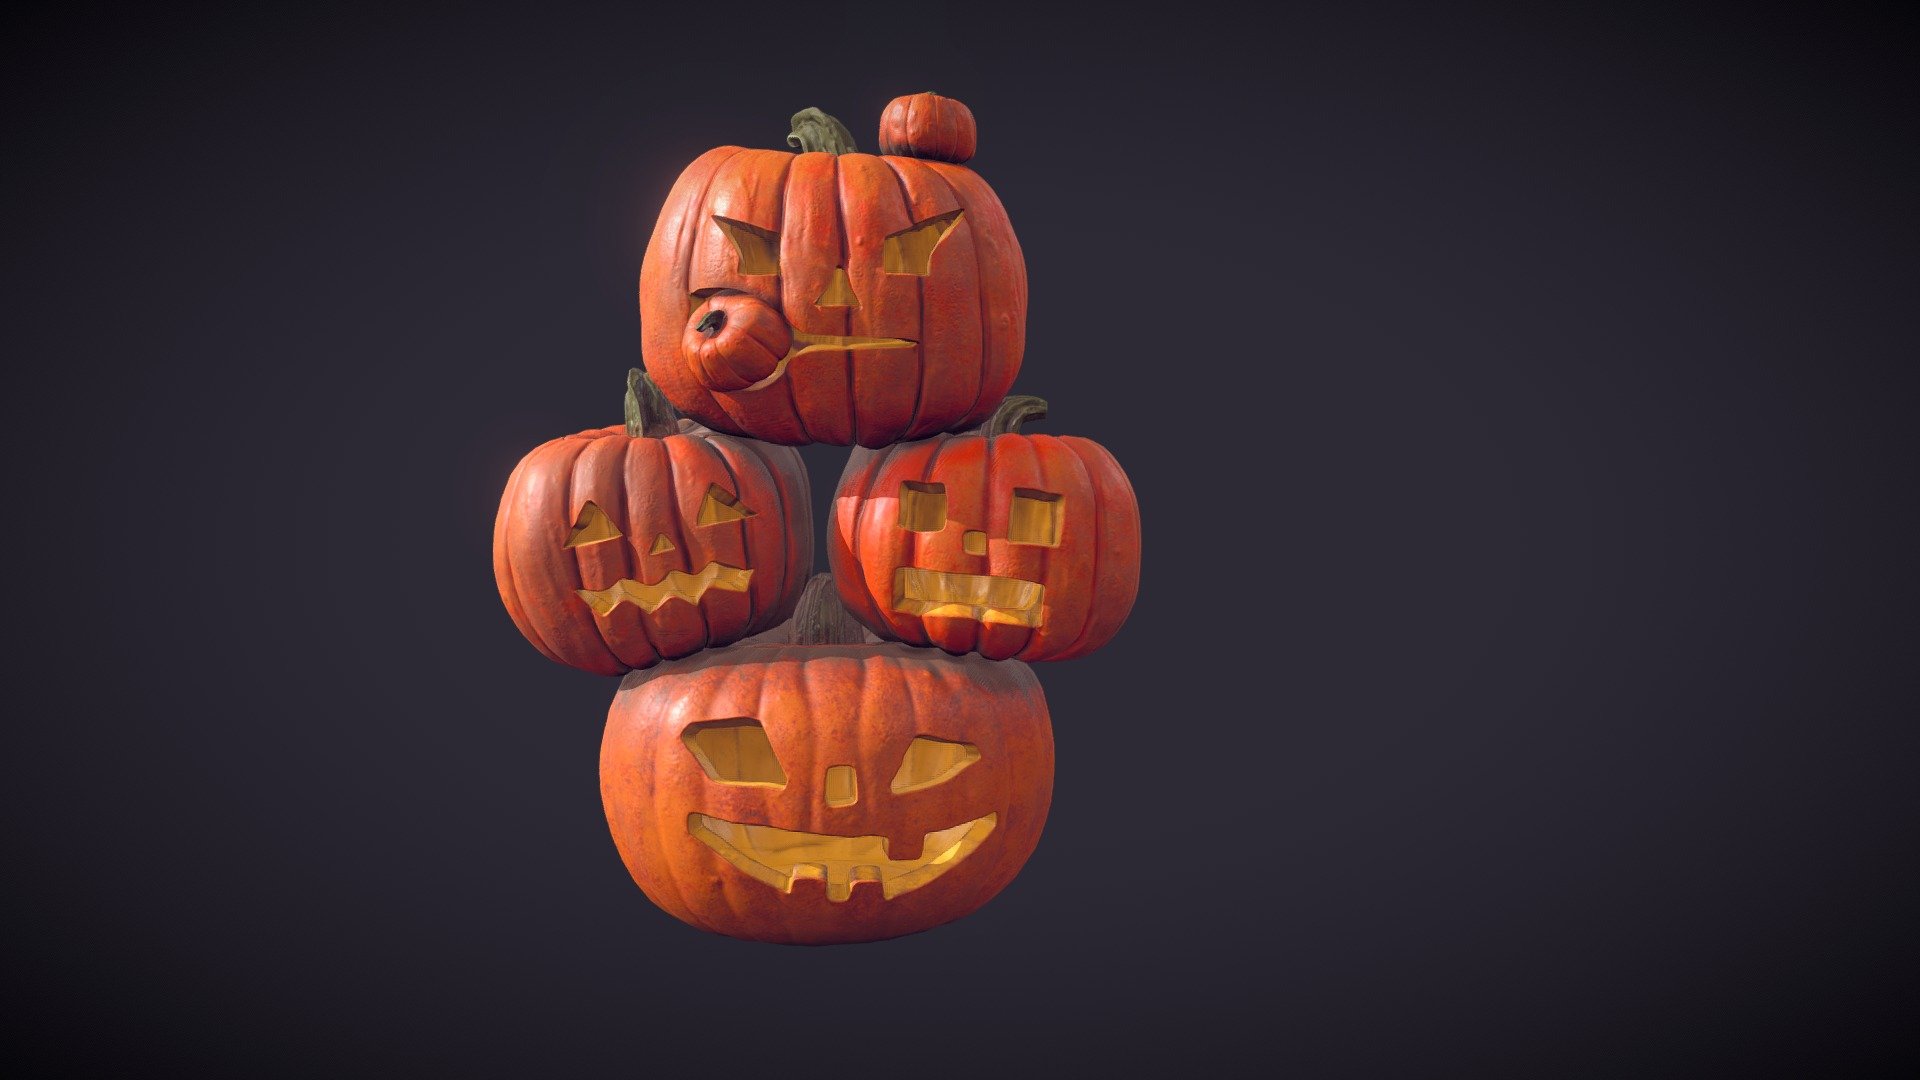 Pumpkins that where sculpted in Zbrush and baked down to a low poly model. Check out the renders in the link below.

[https://www.artstation.com/artwork/J9ZOvv] - Pumpkins - 3D model by StudioXXIV 3d model